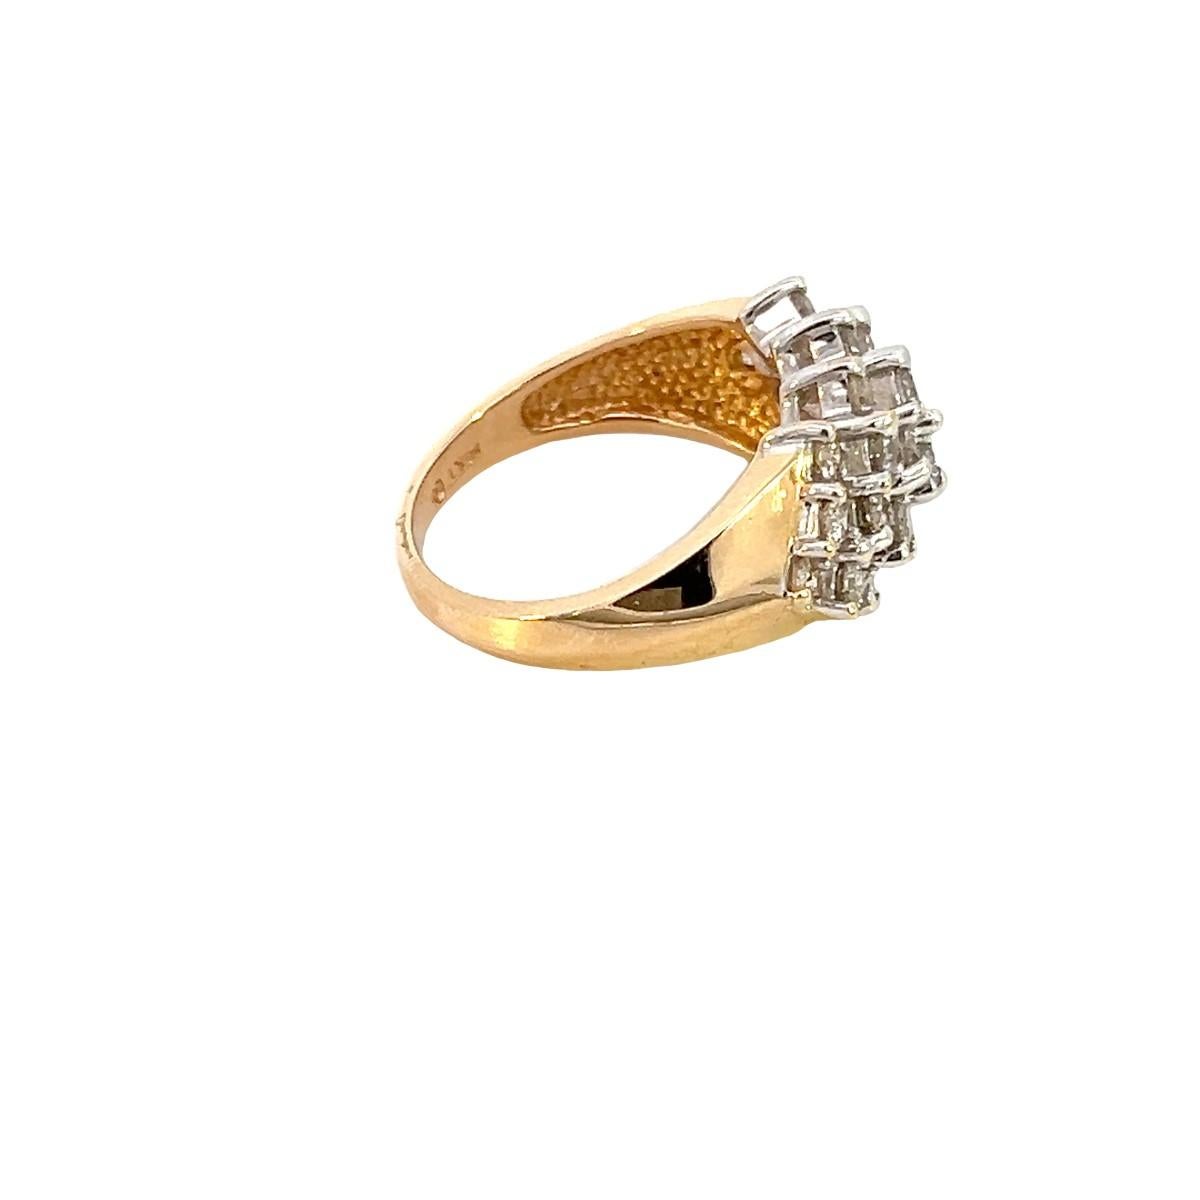 The 14K Yellow Gold Fashion Ring with approximately 1 1/2 carats total weight of round diamonds in size 7 sounds like a stunning piece of jewelry. Let's break down why it might be considered nice and awesome:

Metal Quality: 14K yellow gold is a